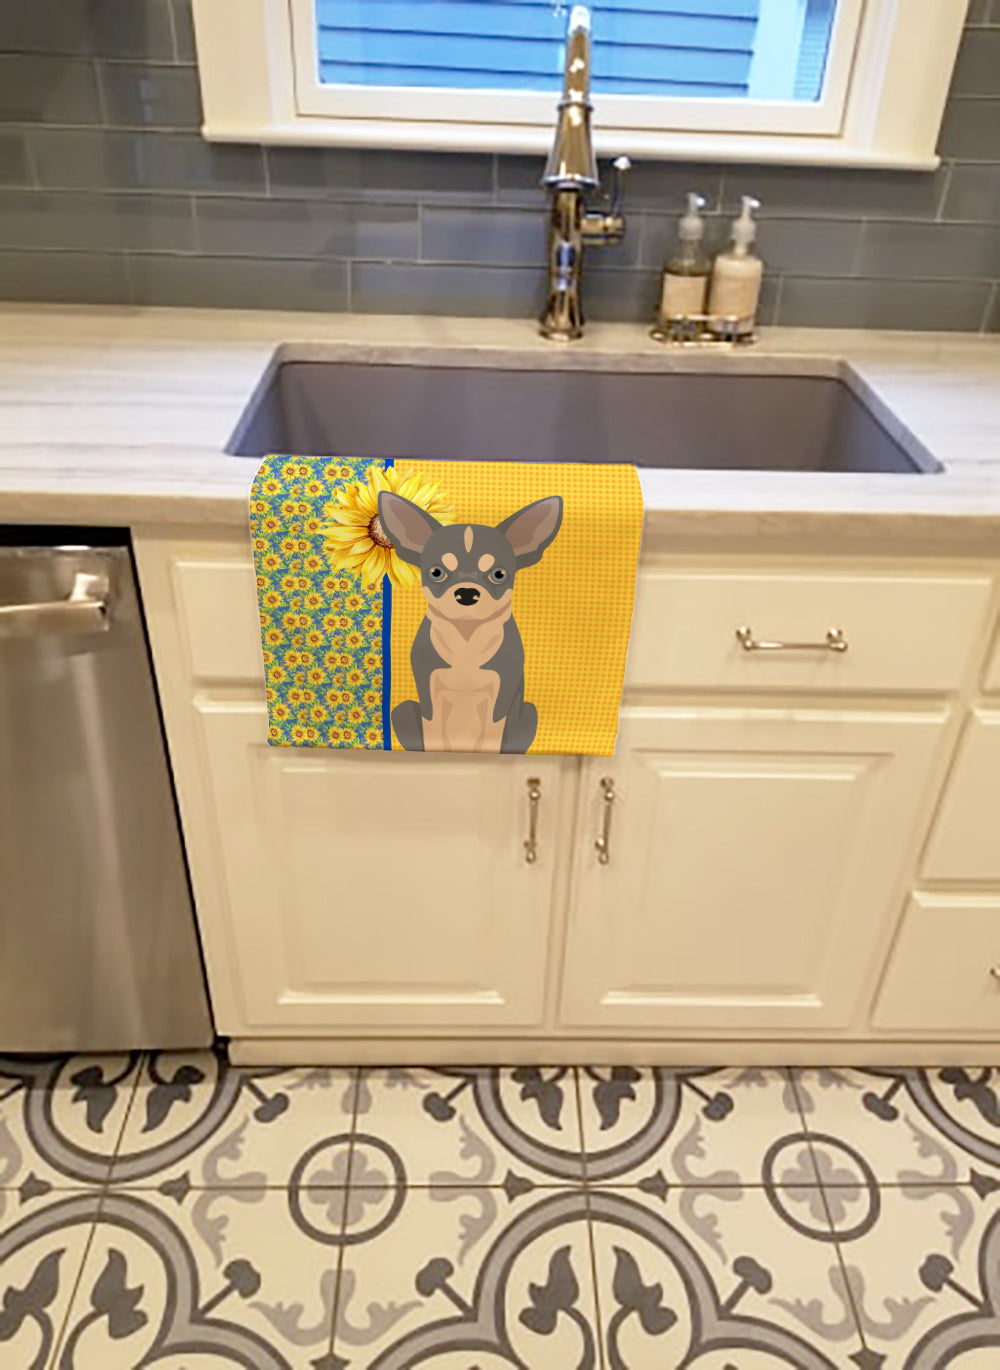 Buy this Summer Sunflowers Blue and White Chihuahua Kitchen Towel